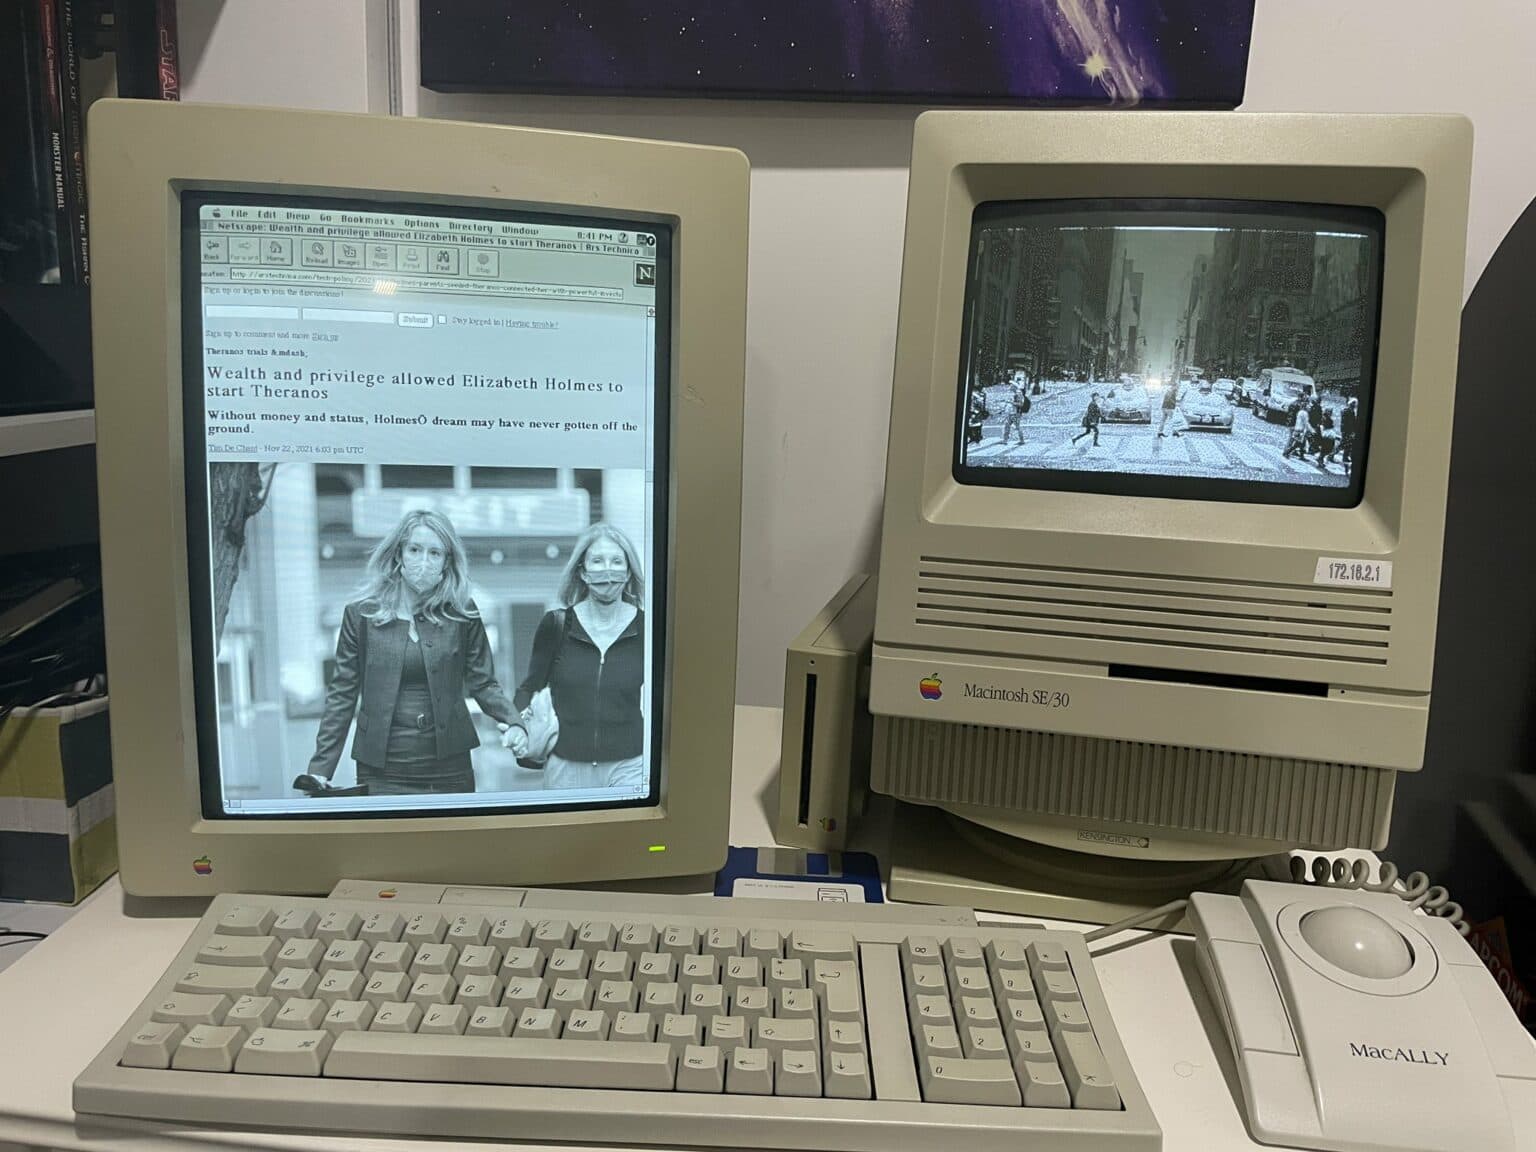 A souped-up Apple SE/30 and a Portrait Display are core to Ciprian's vintage setup.